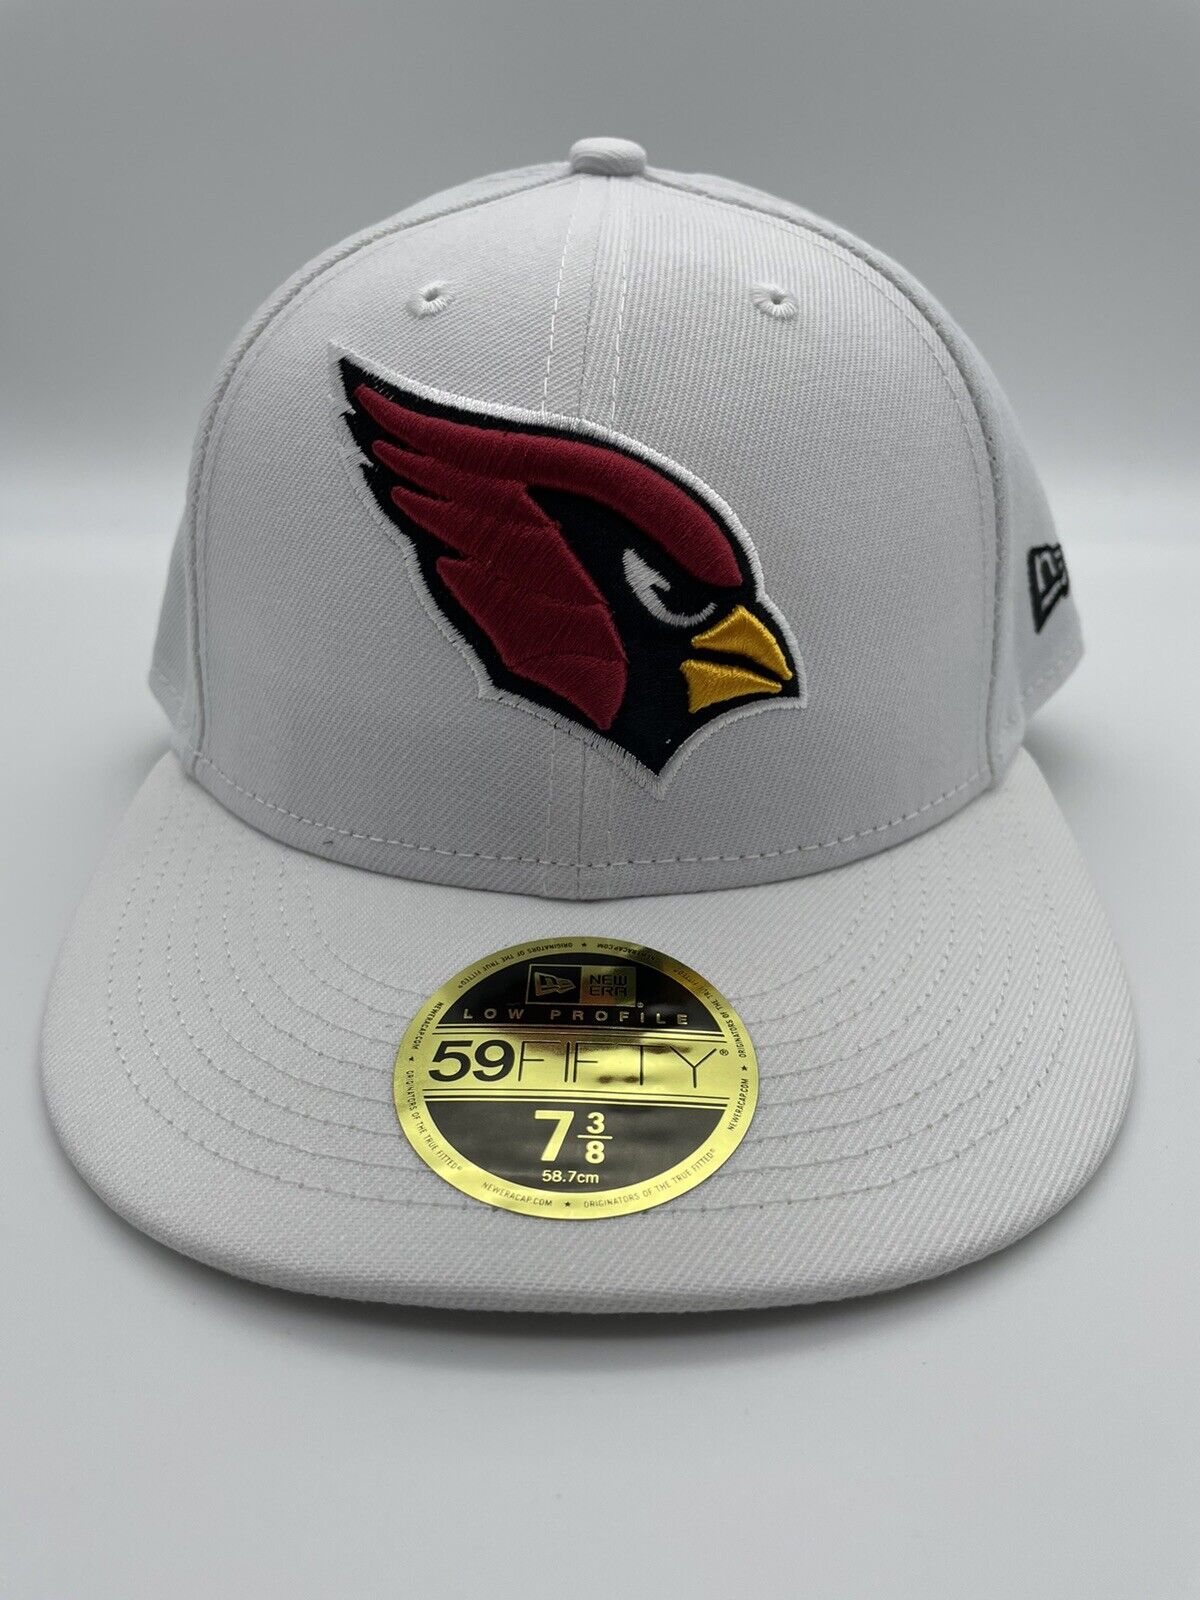 New Era 59Fifty Arizona Cardinals White Low Profile Fitted Hat Cap 7 3/8 -  NEW